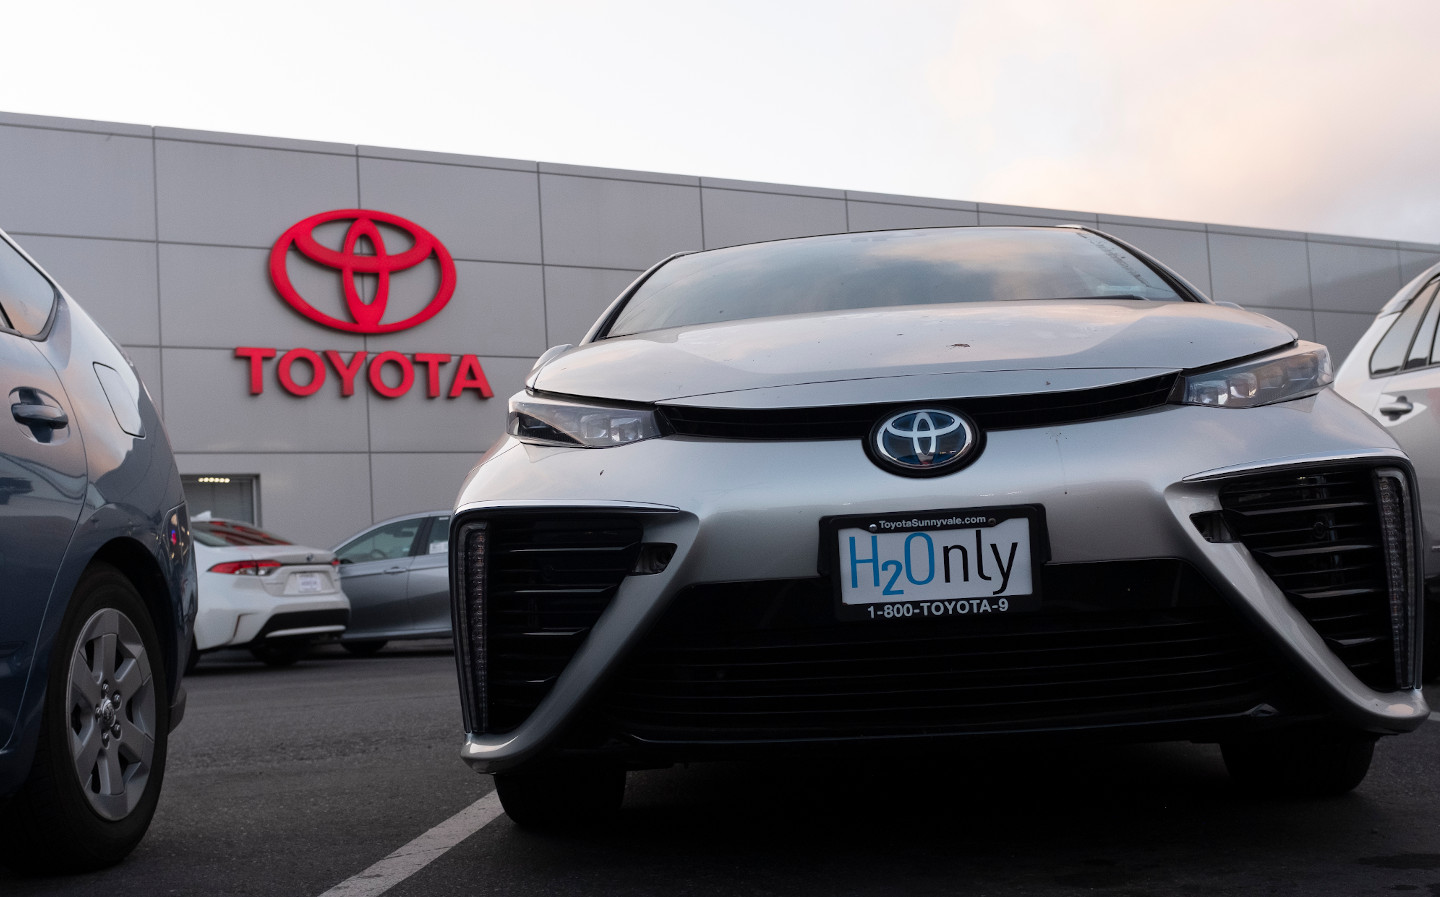 Toyota partners with Chinese companies to produce hydrogen fuel cell